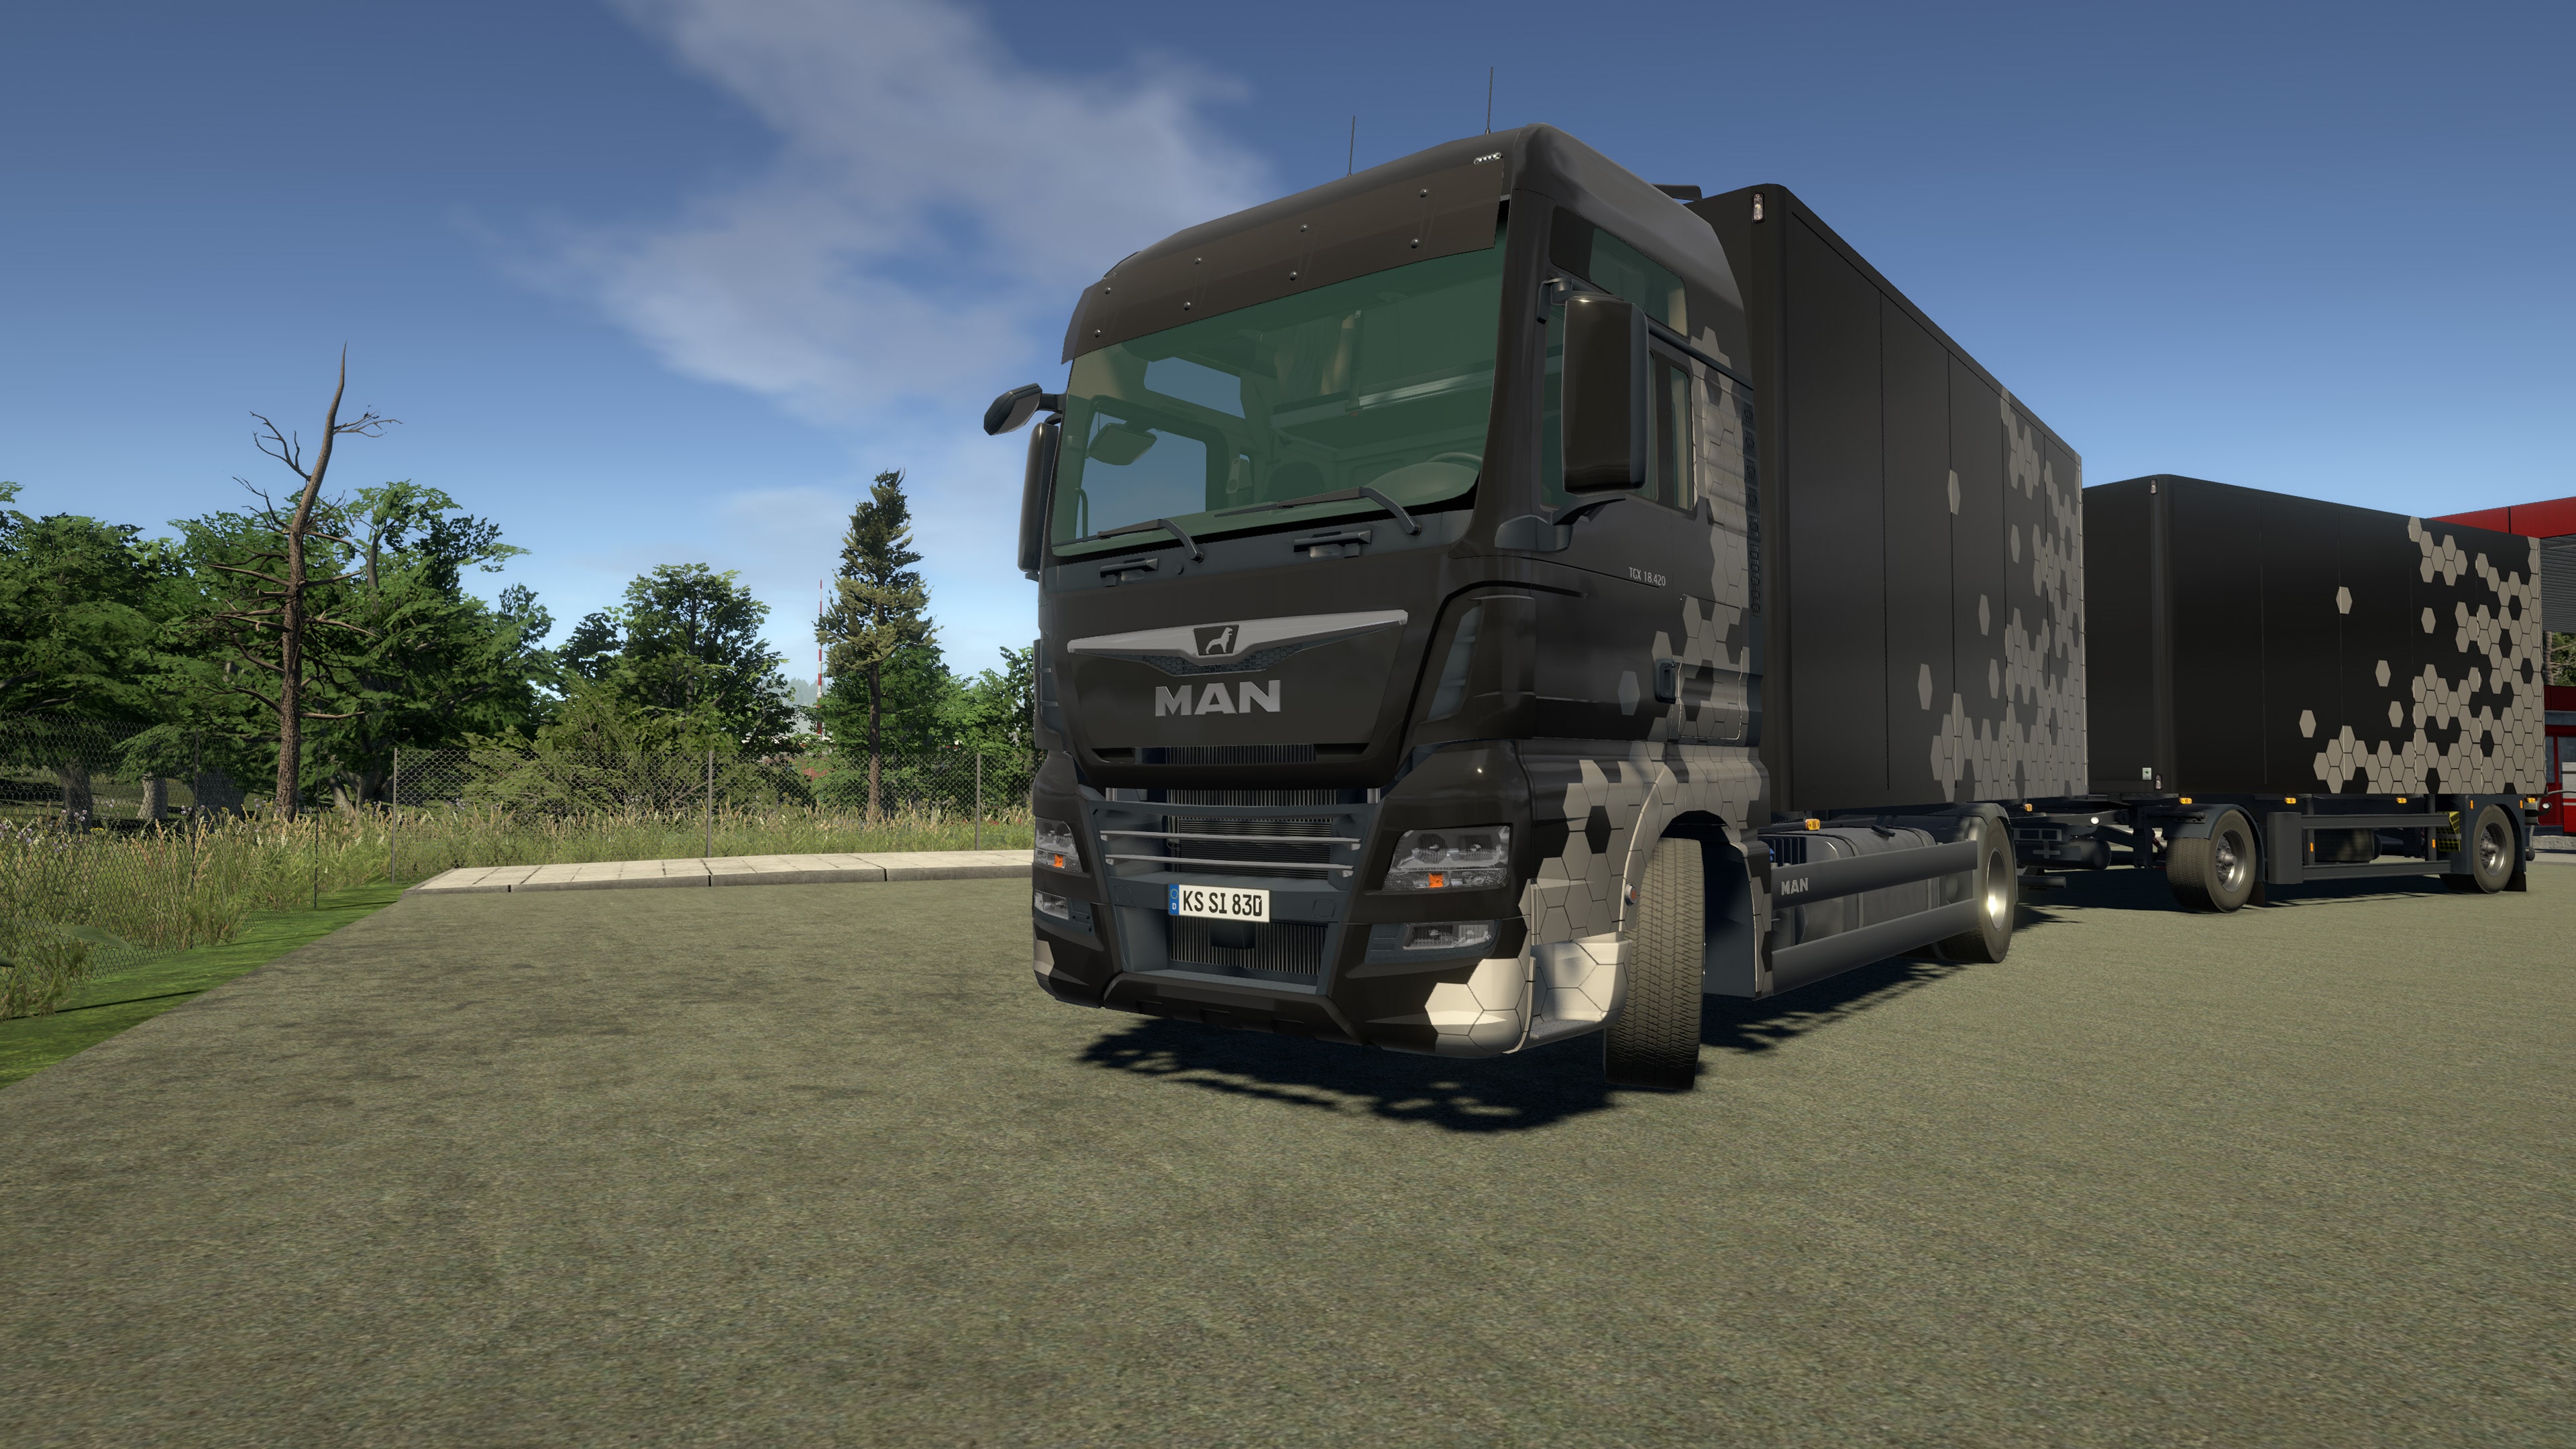 PS5 On the Road: Truck Simulator